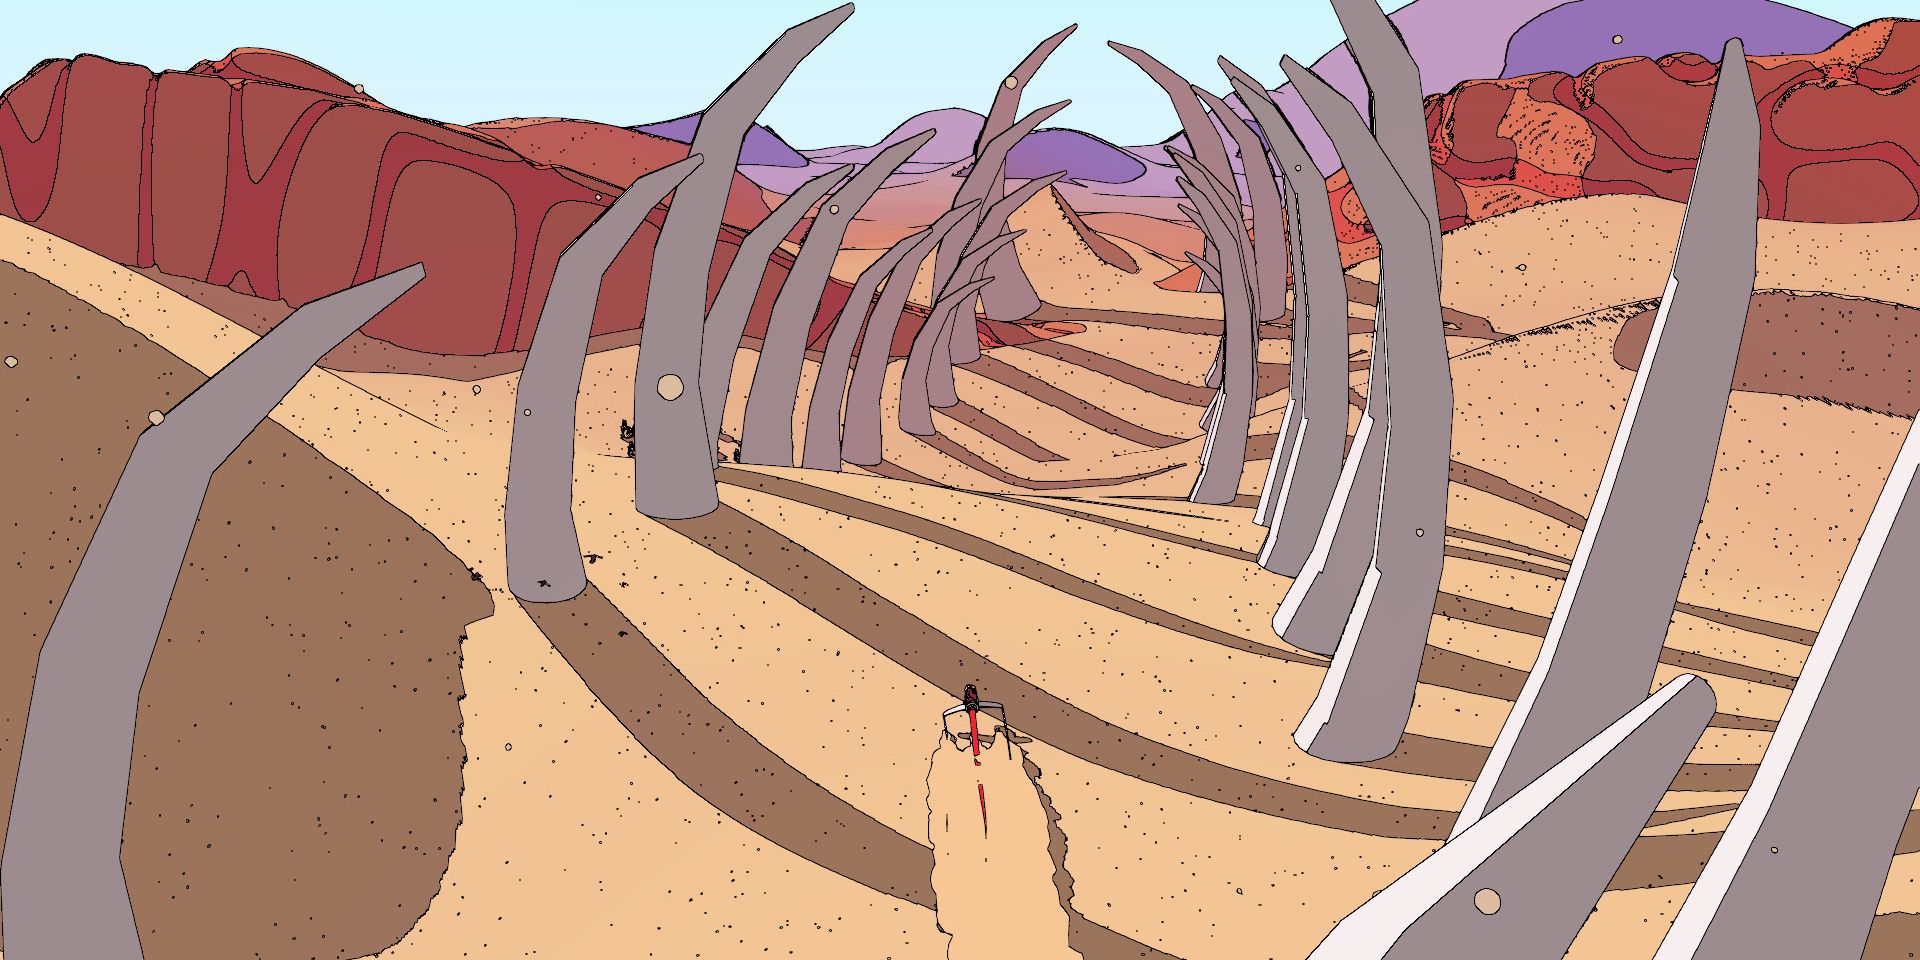 Sable Game's Exploration In The Desert